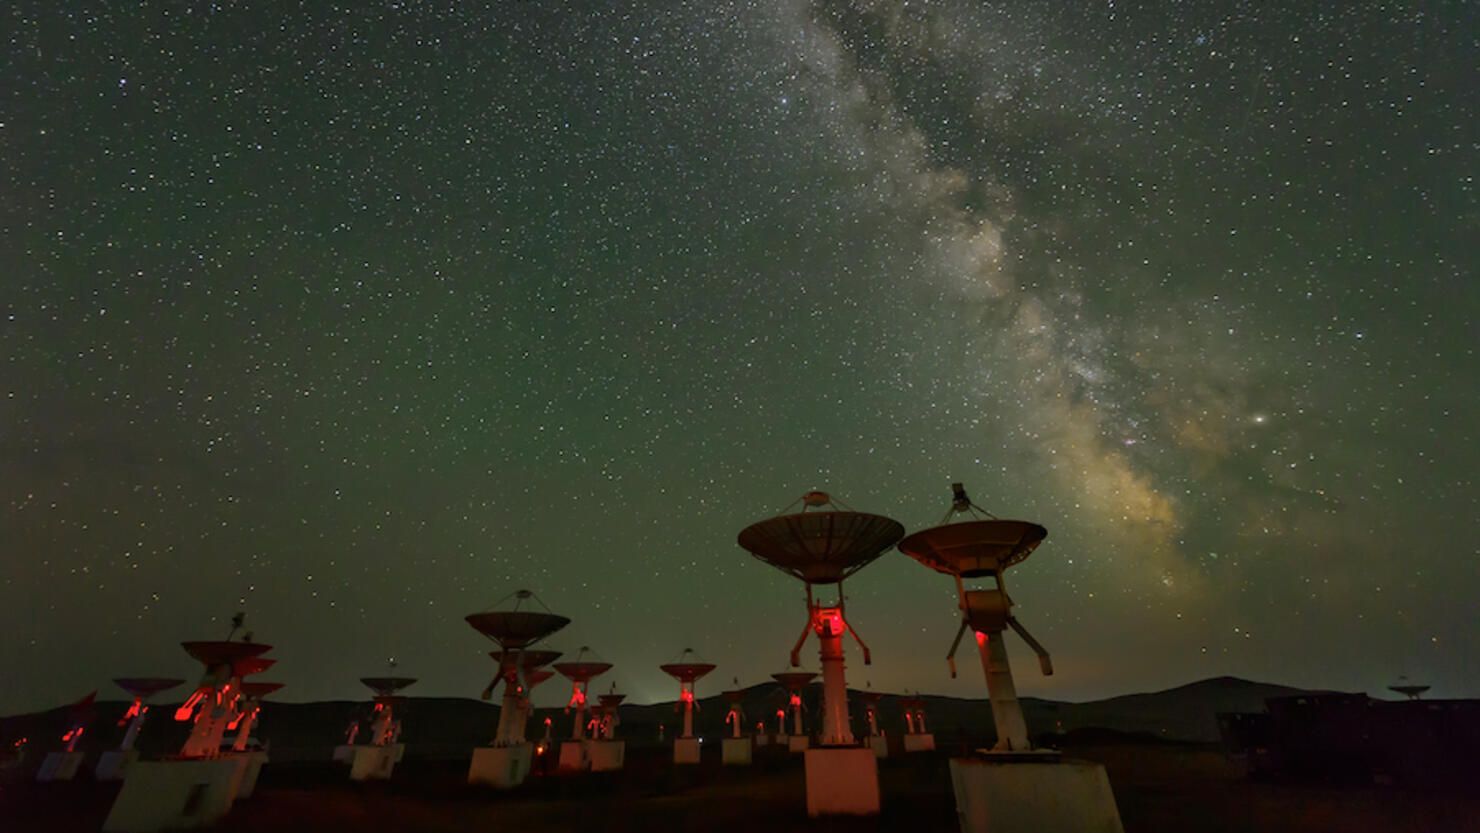 The radio spectrum imager array under the Milky Way Galaxy